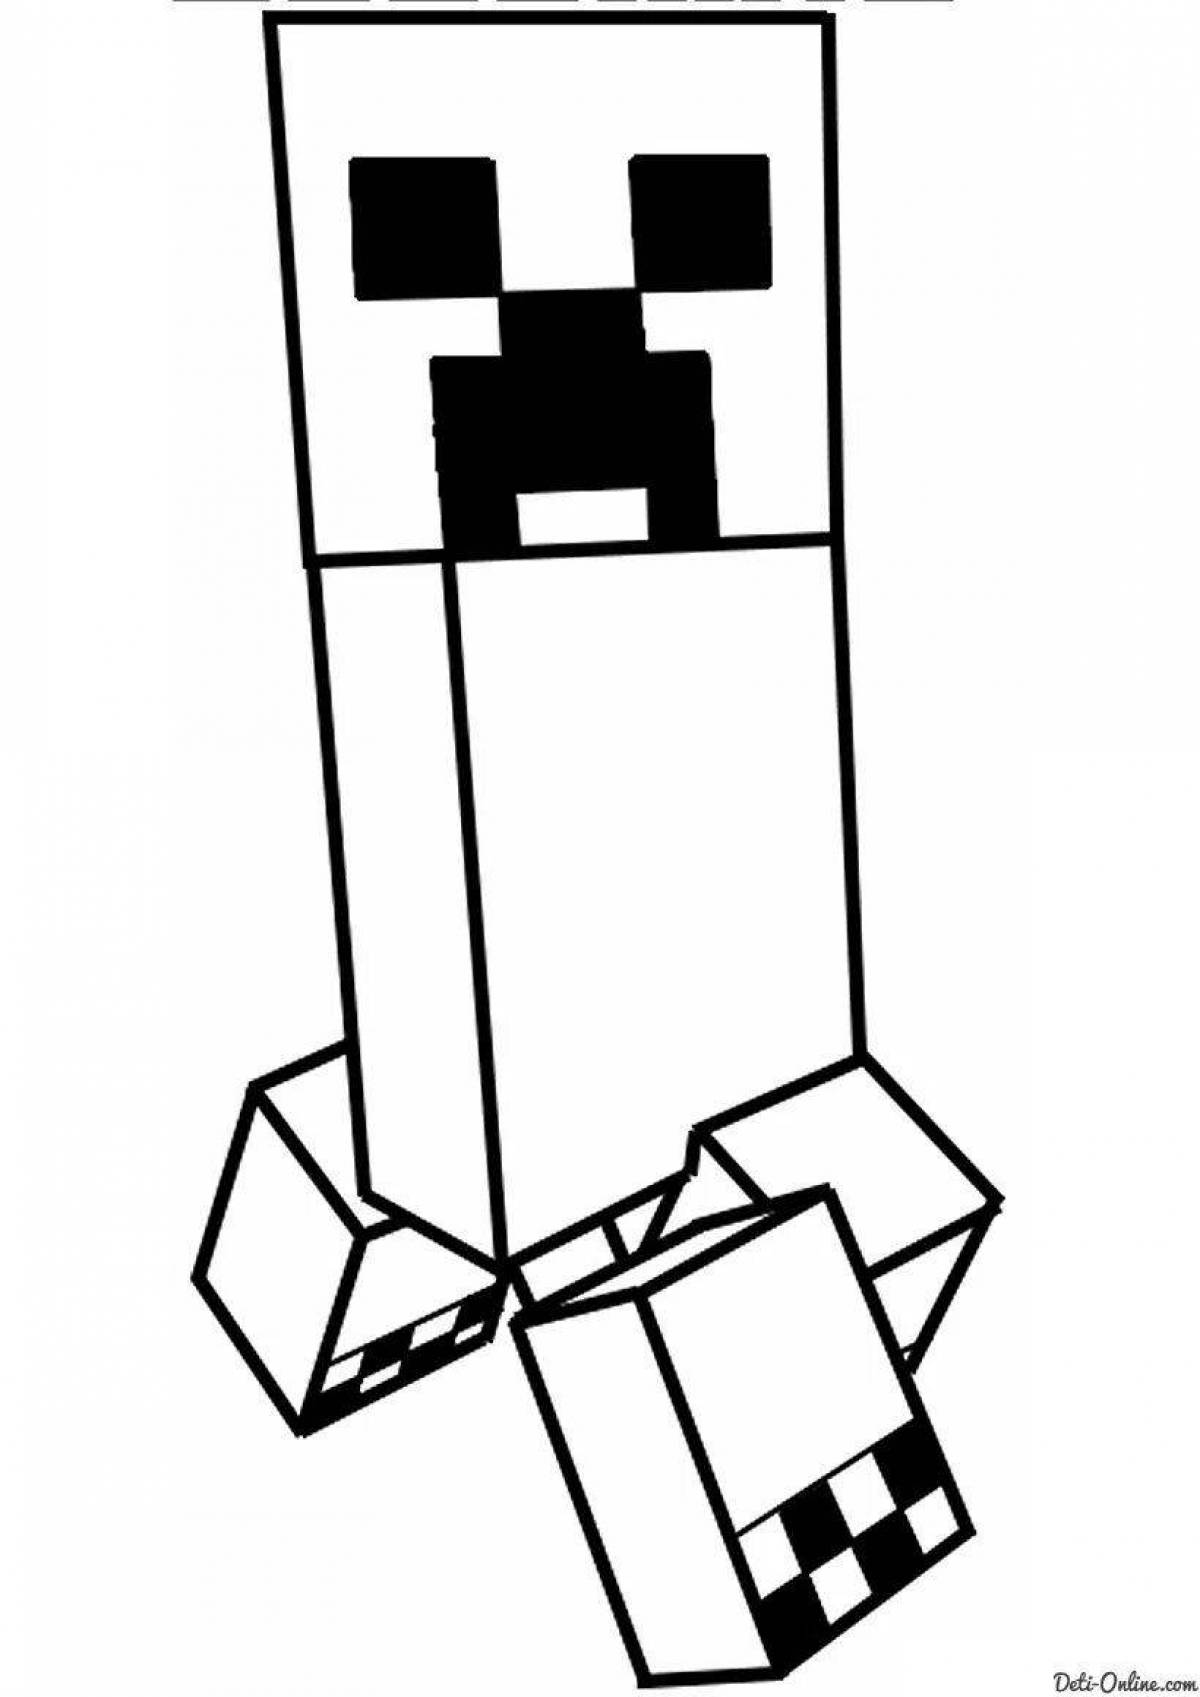 Great coloring for minecraft fans